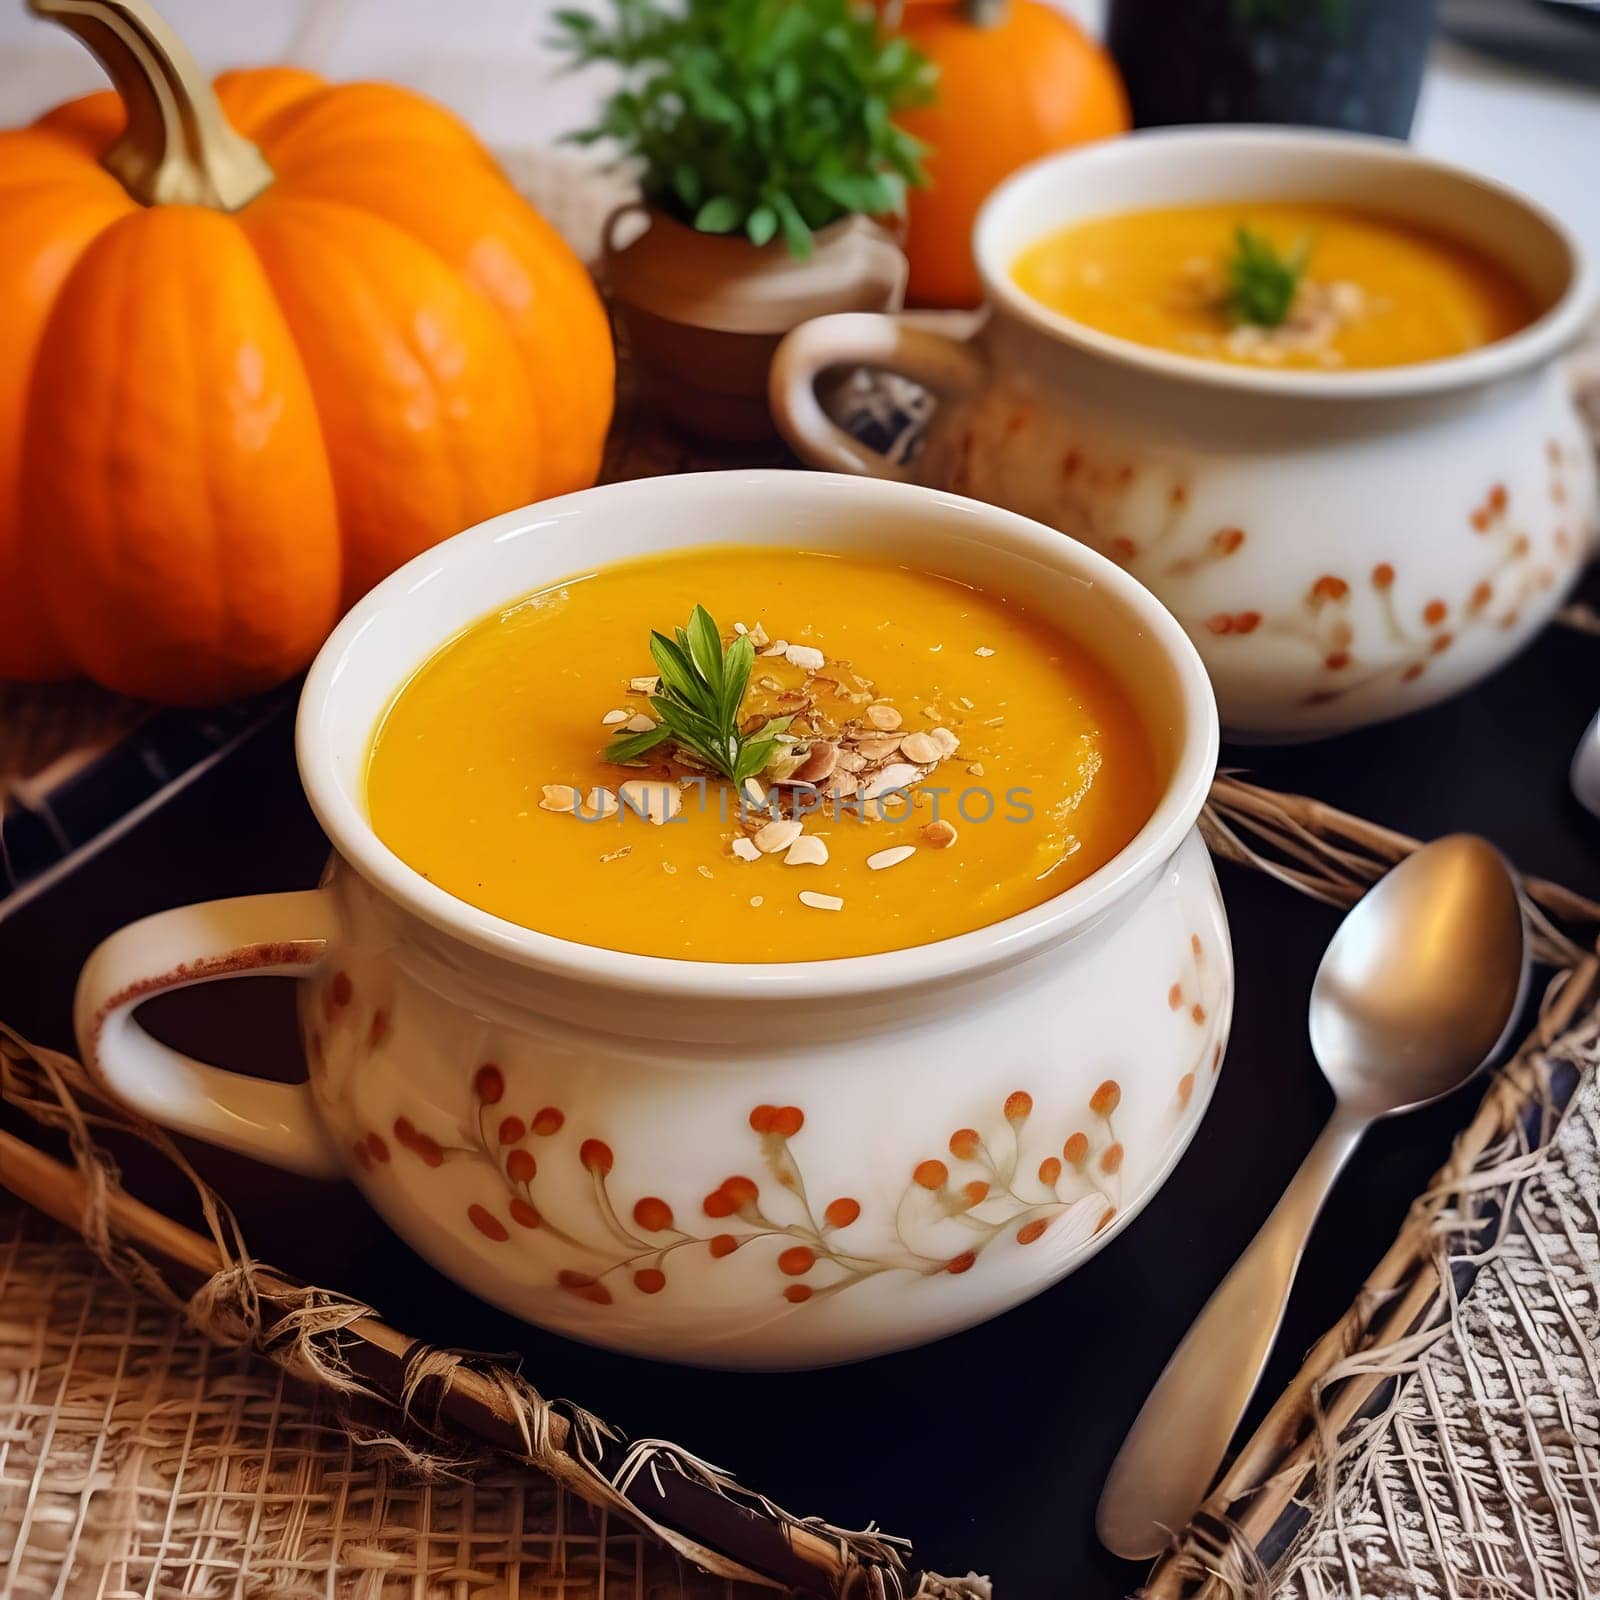 Pumpkin soup in a ceramic decorated bowl with an ear. Pumpkin as a dish of thanksgiving for the harvest. by ThemesS